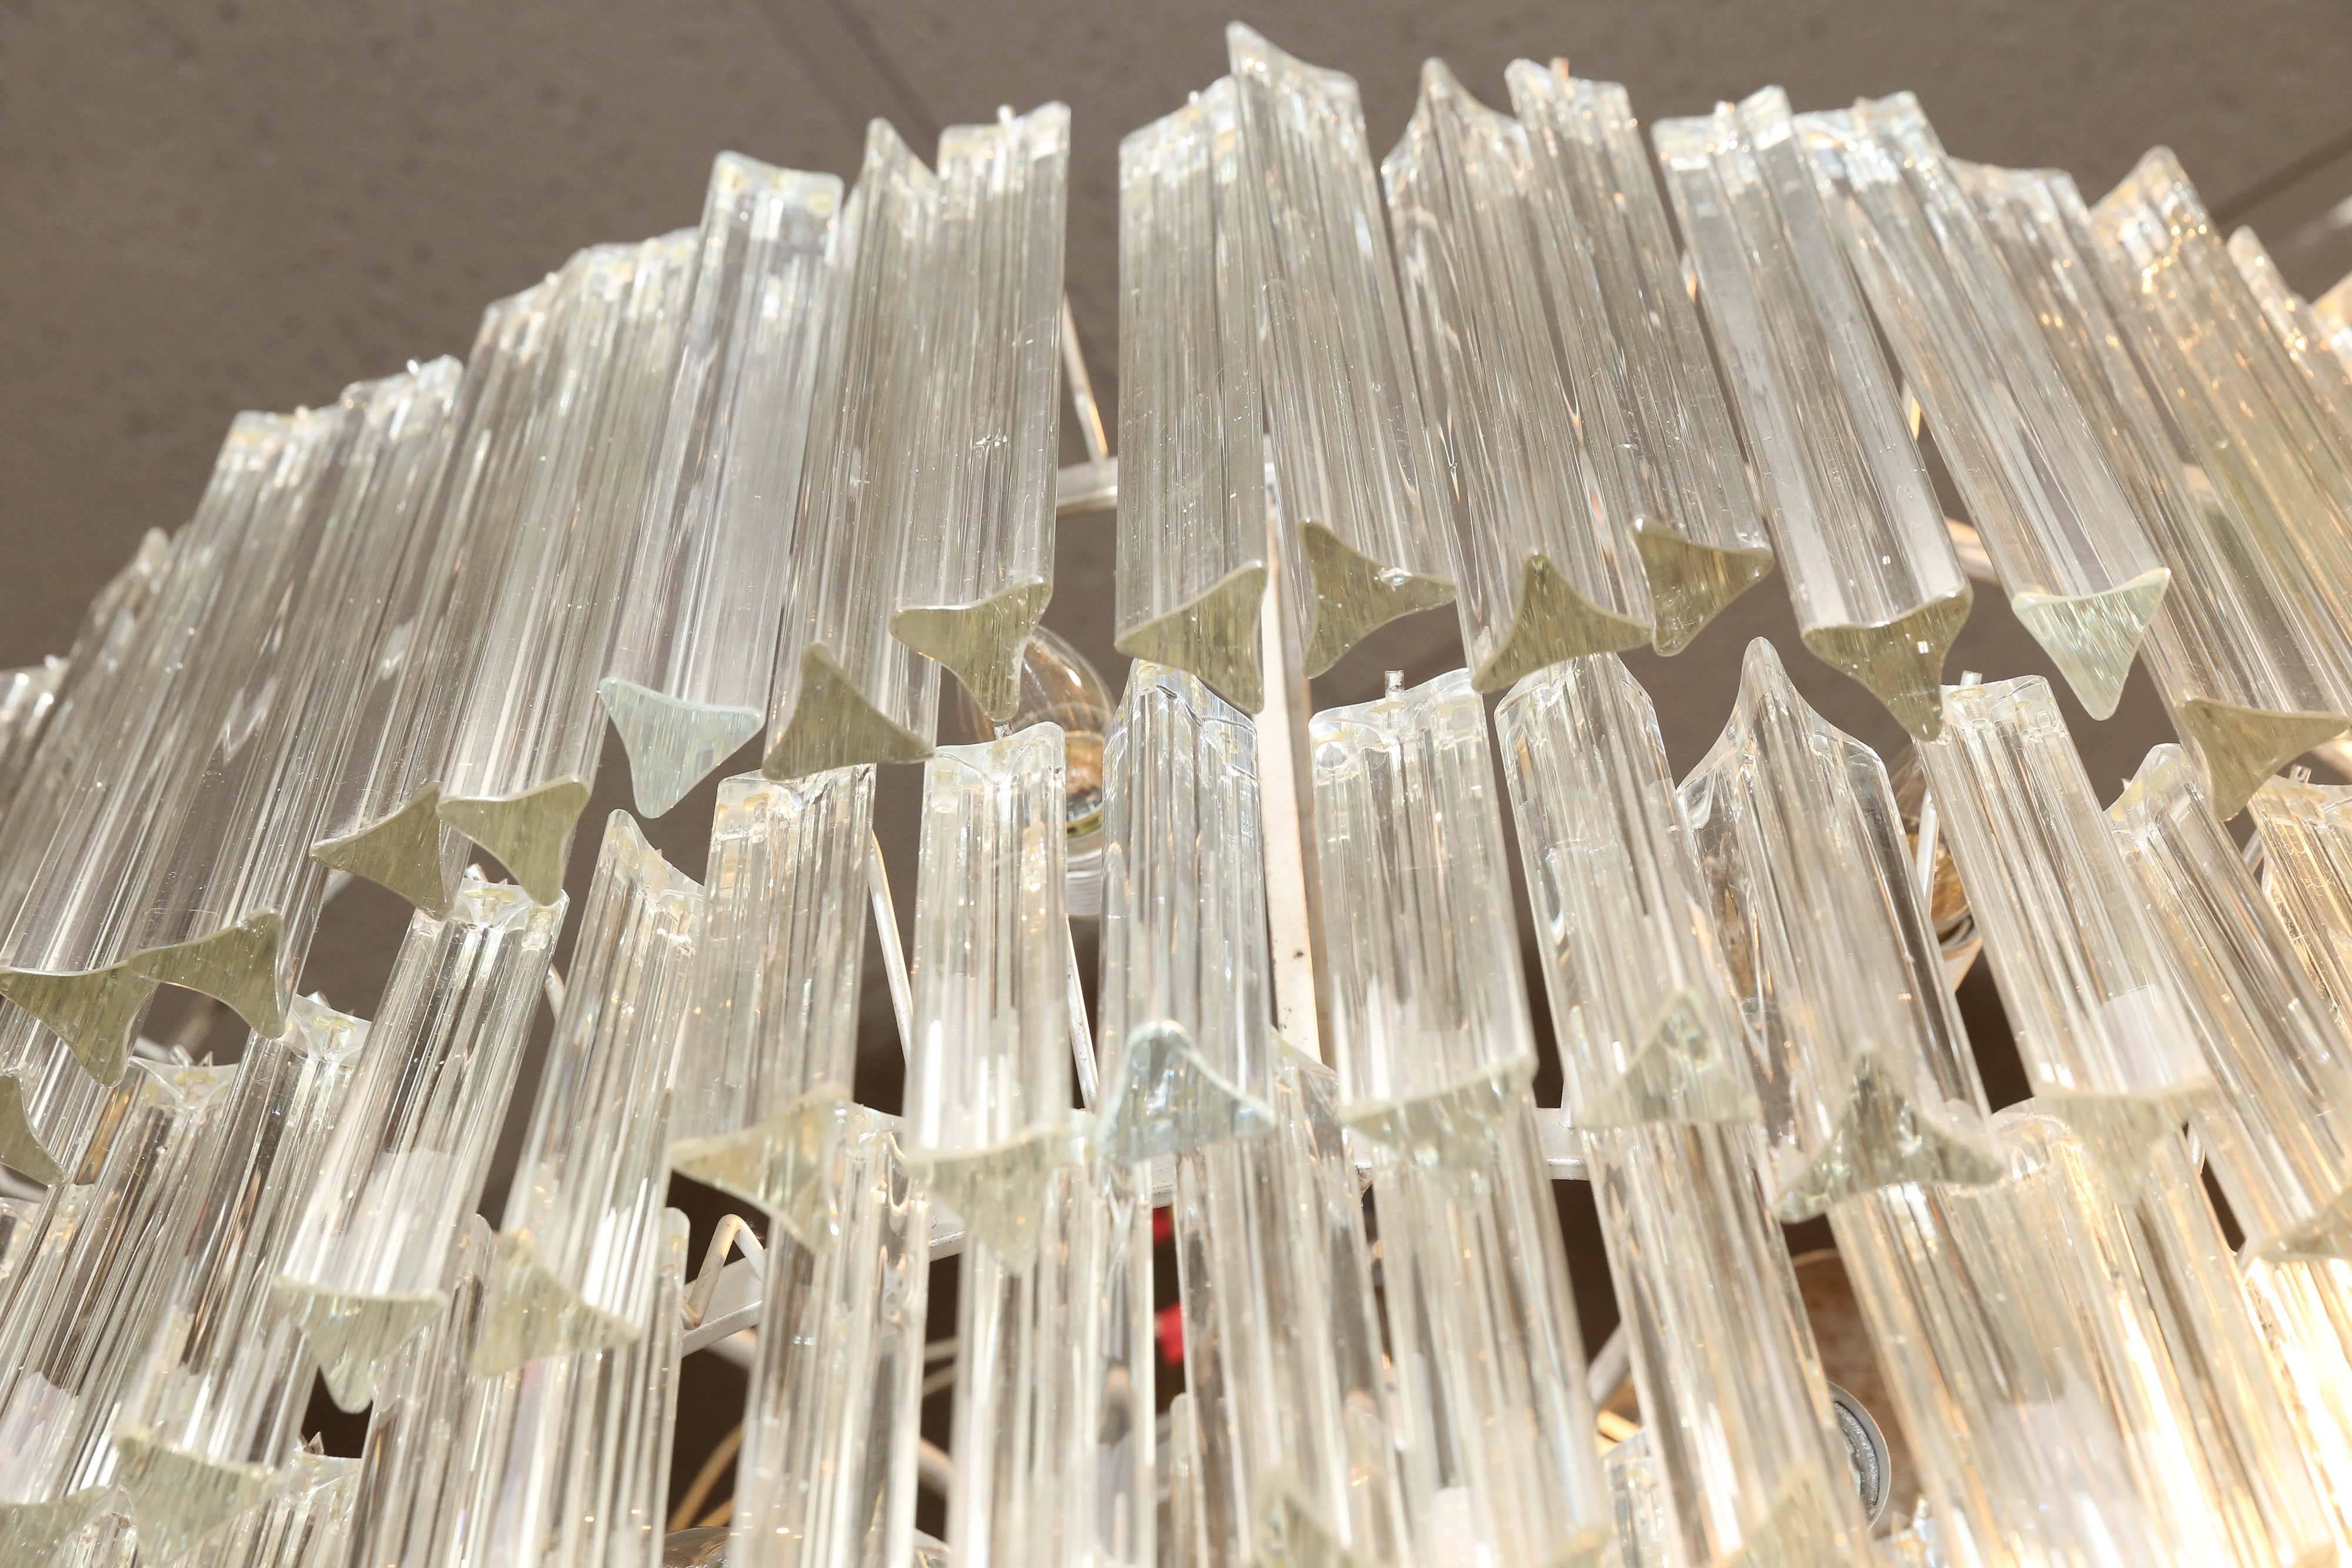 An Italian Murano glass chandelier with cascading tiers of Venetian glass.
An elegant fixture with faceted glass prisms. This fixture has glass rods that 
are suspended from a silver colored metal form. This is attributed to Paolo
Venini